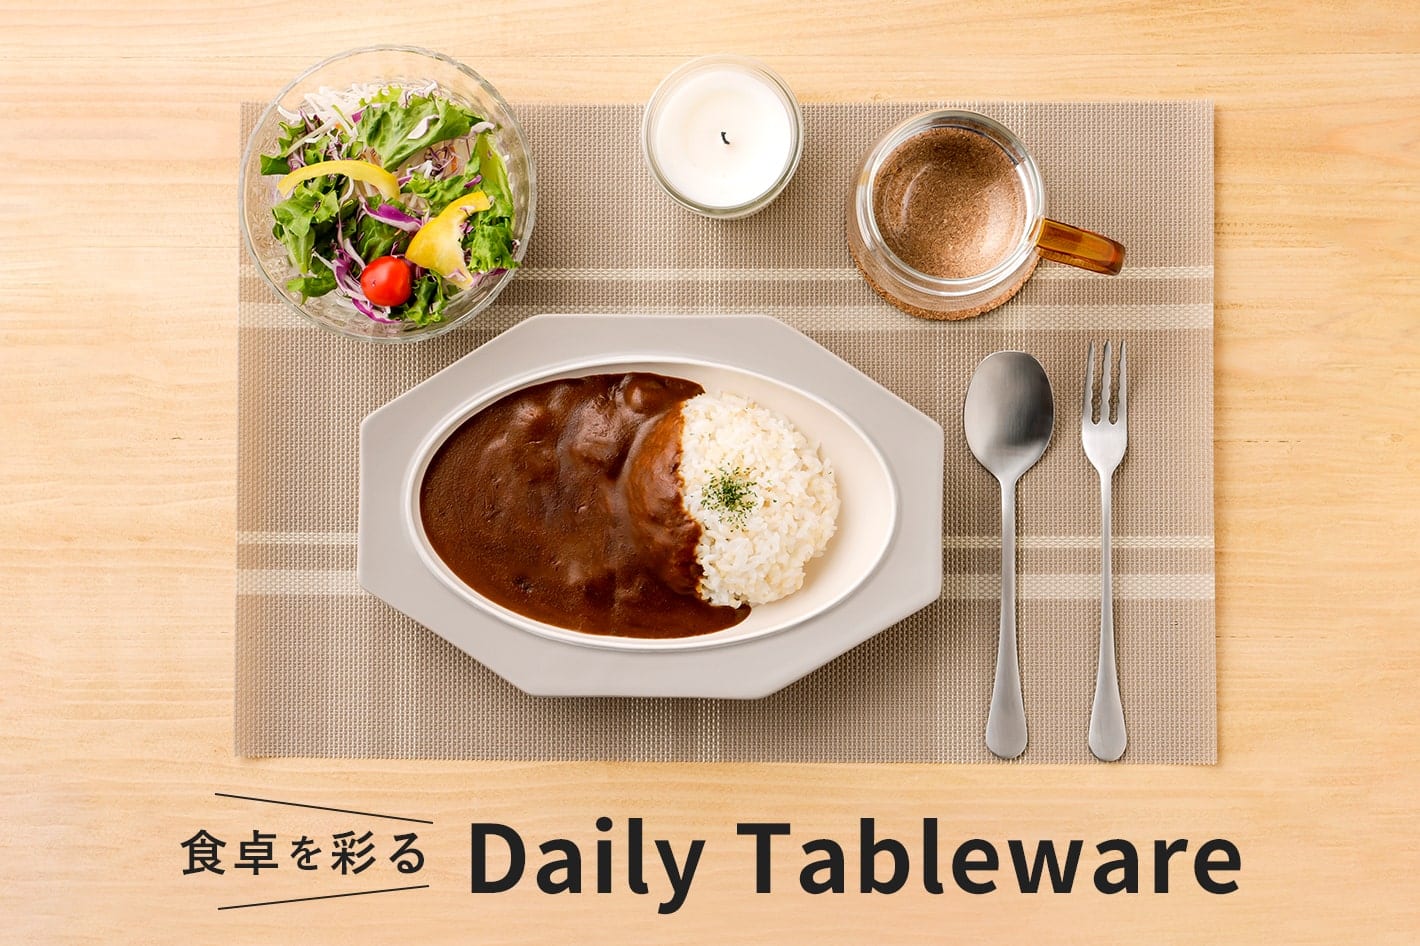 3COINS 食卓を彩る”Daily Tableware”